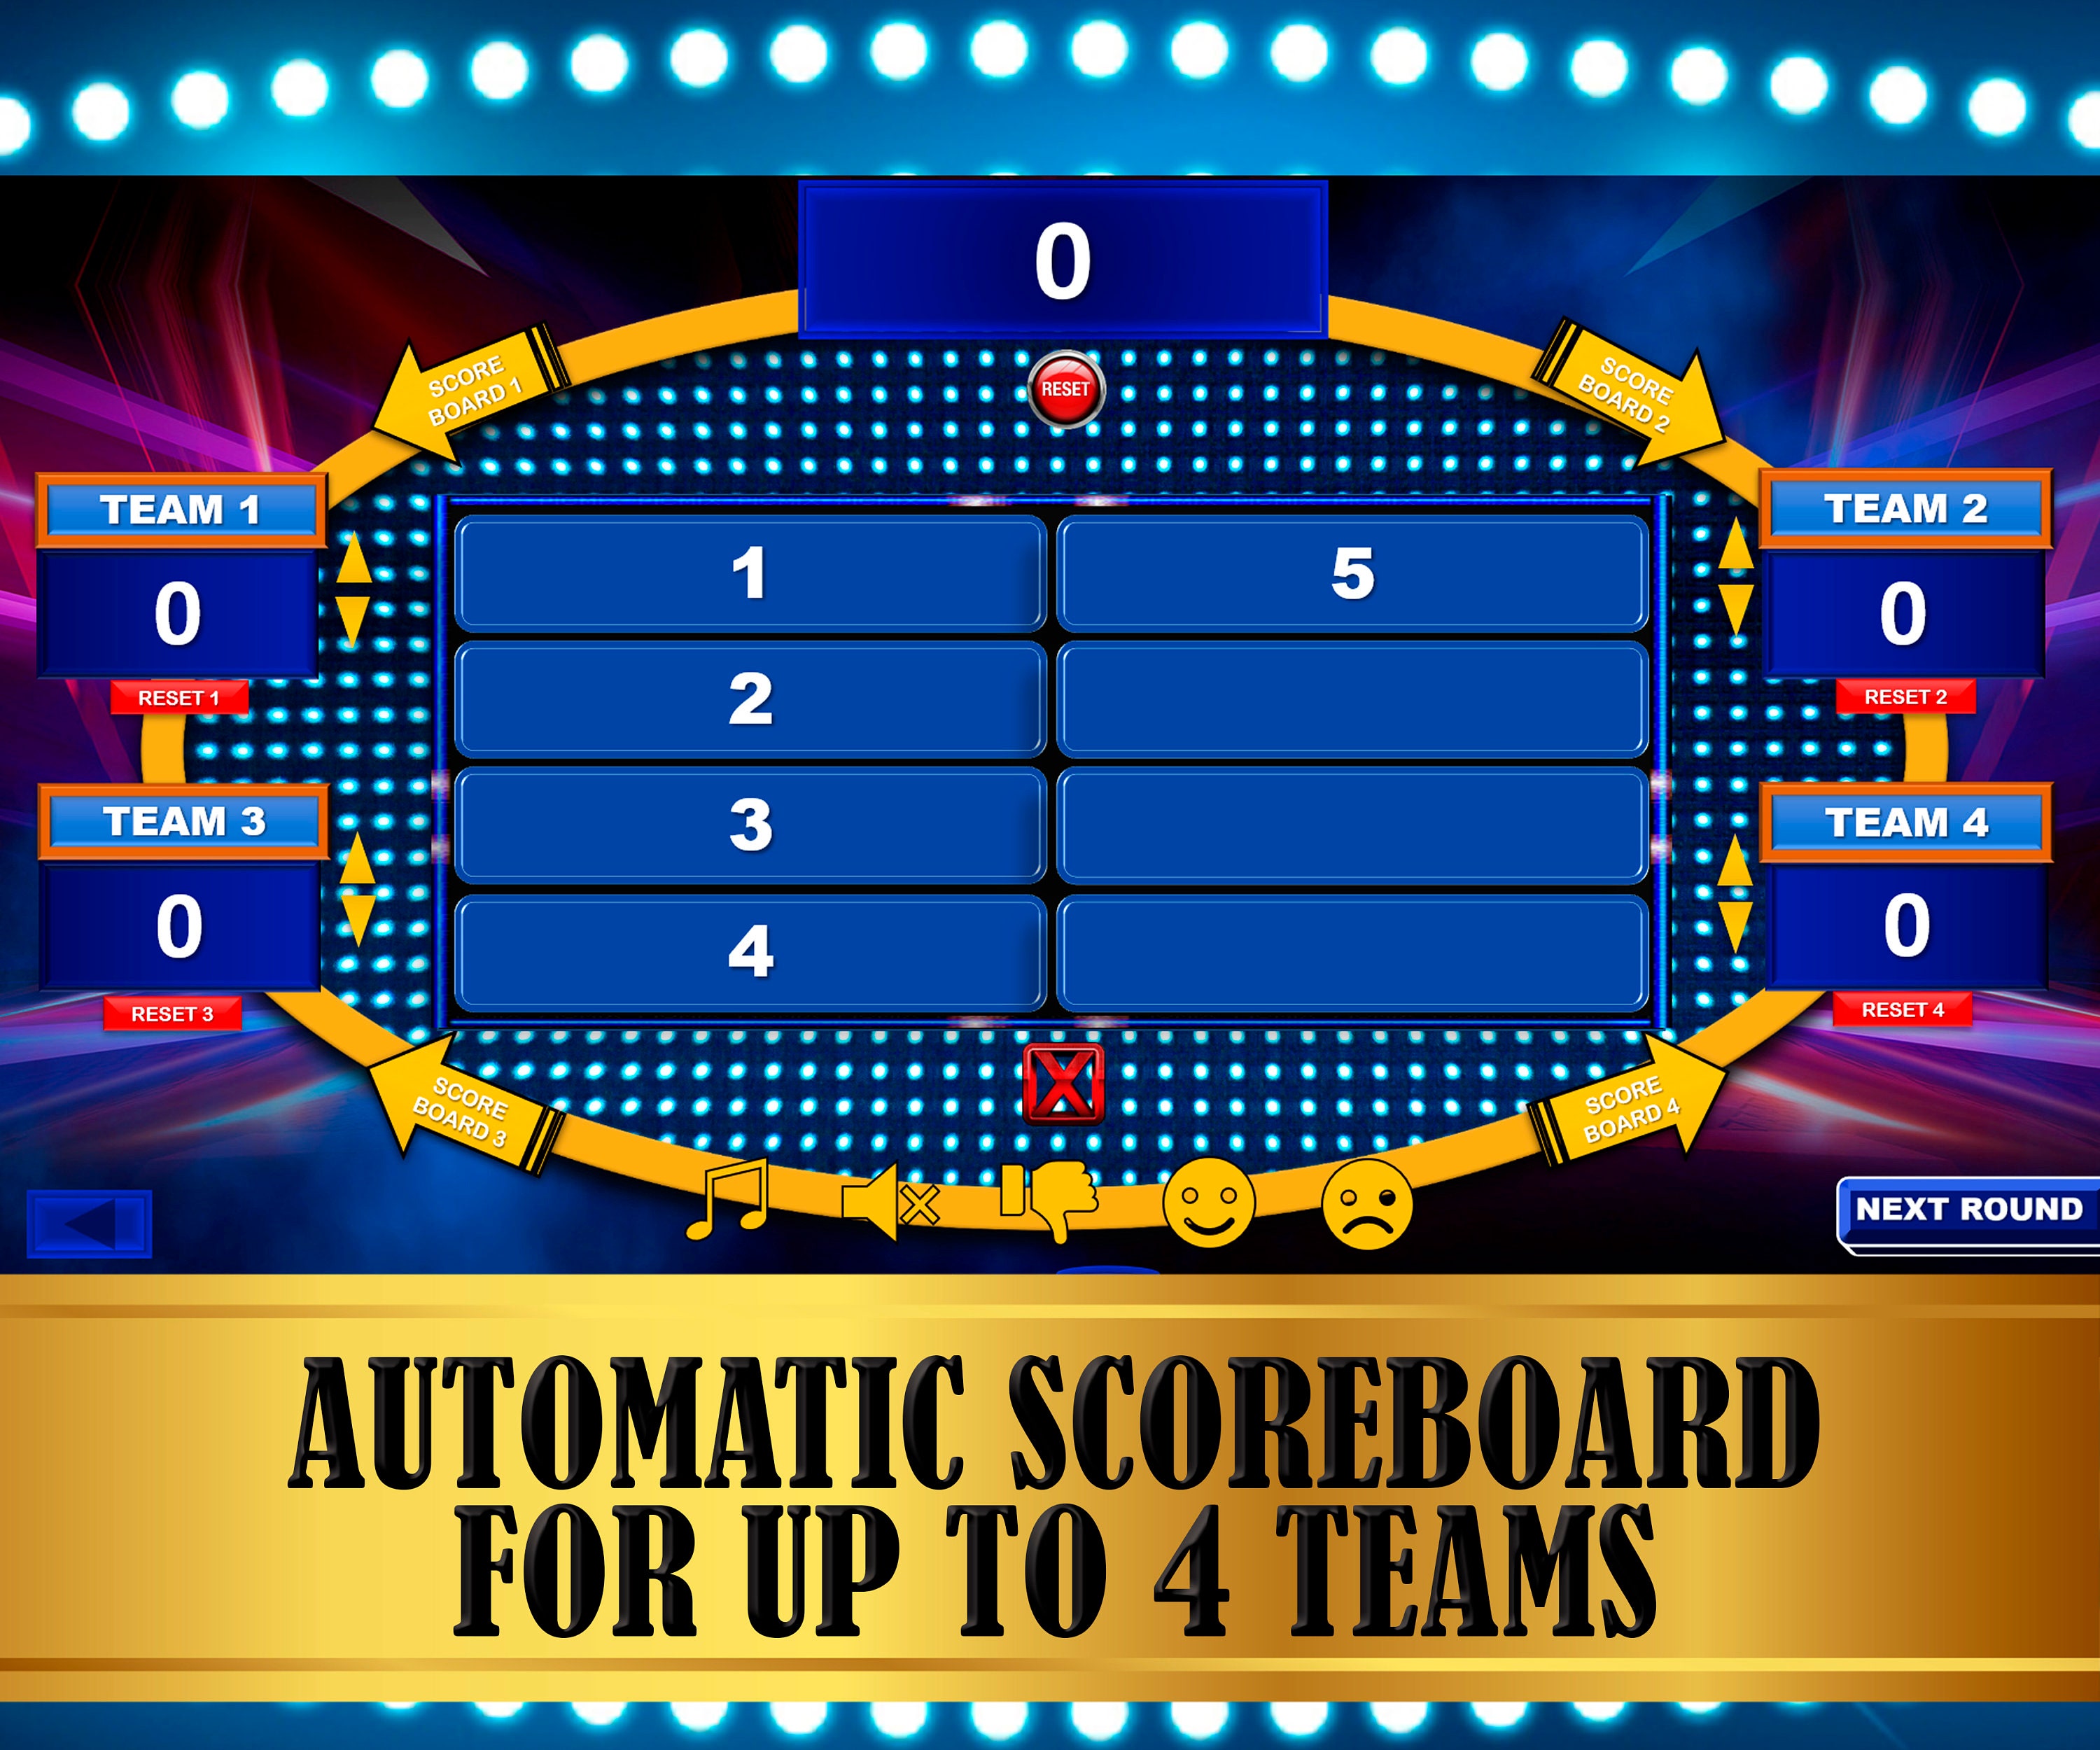 How to add a Family Feud-style game to your next class/PD - Ditch